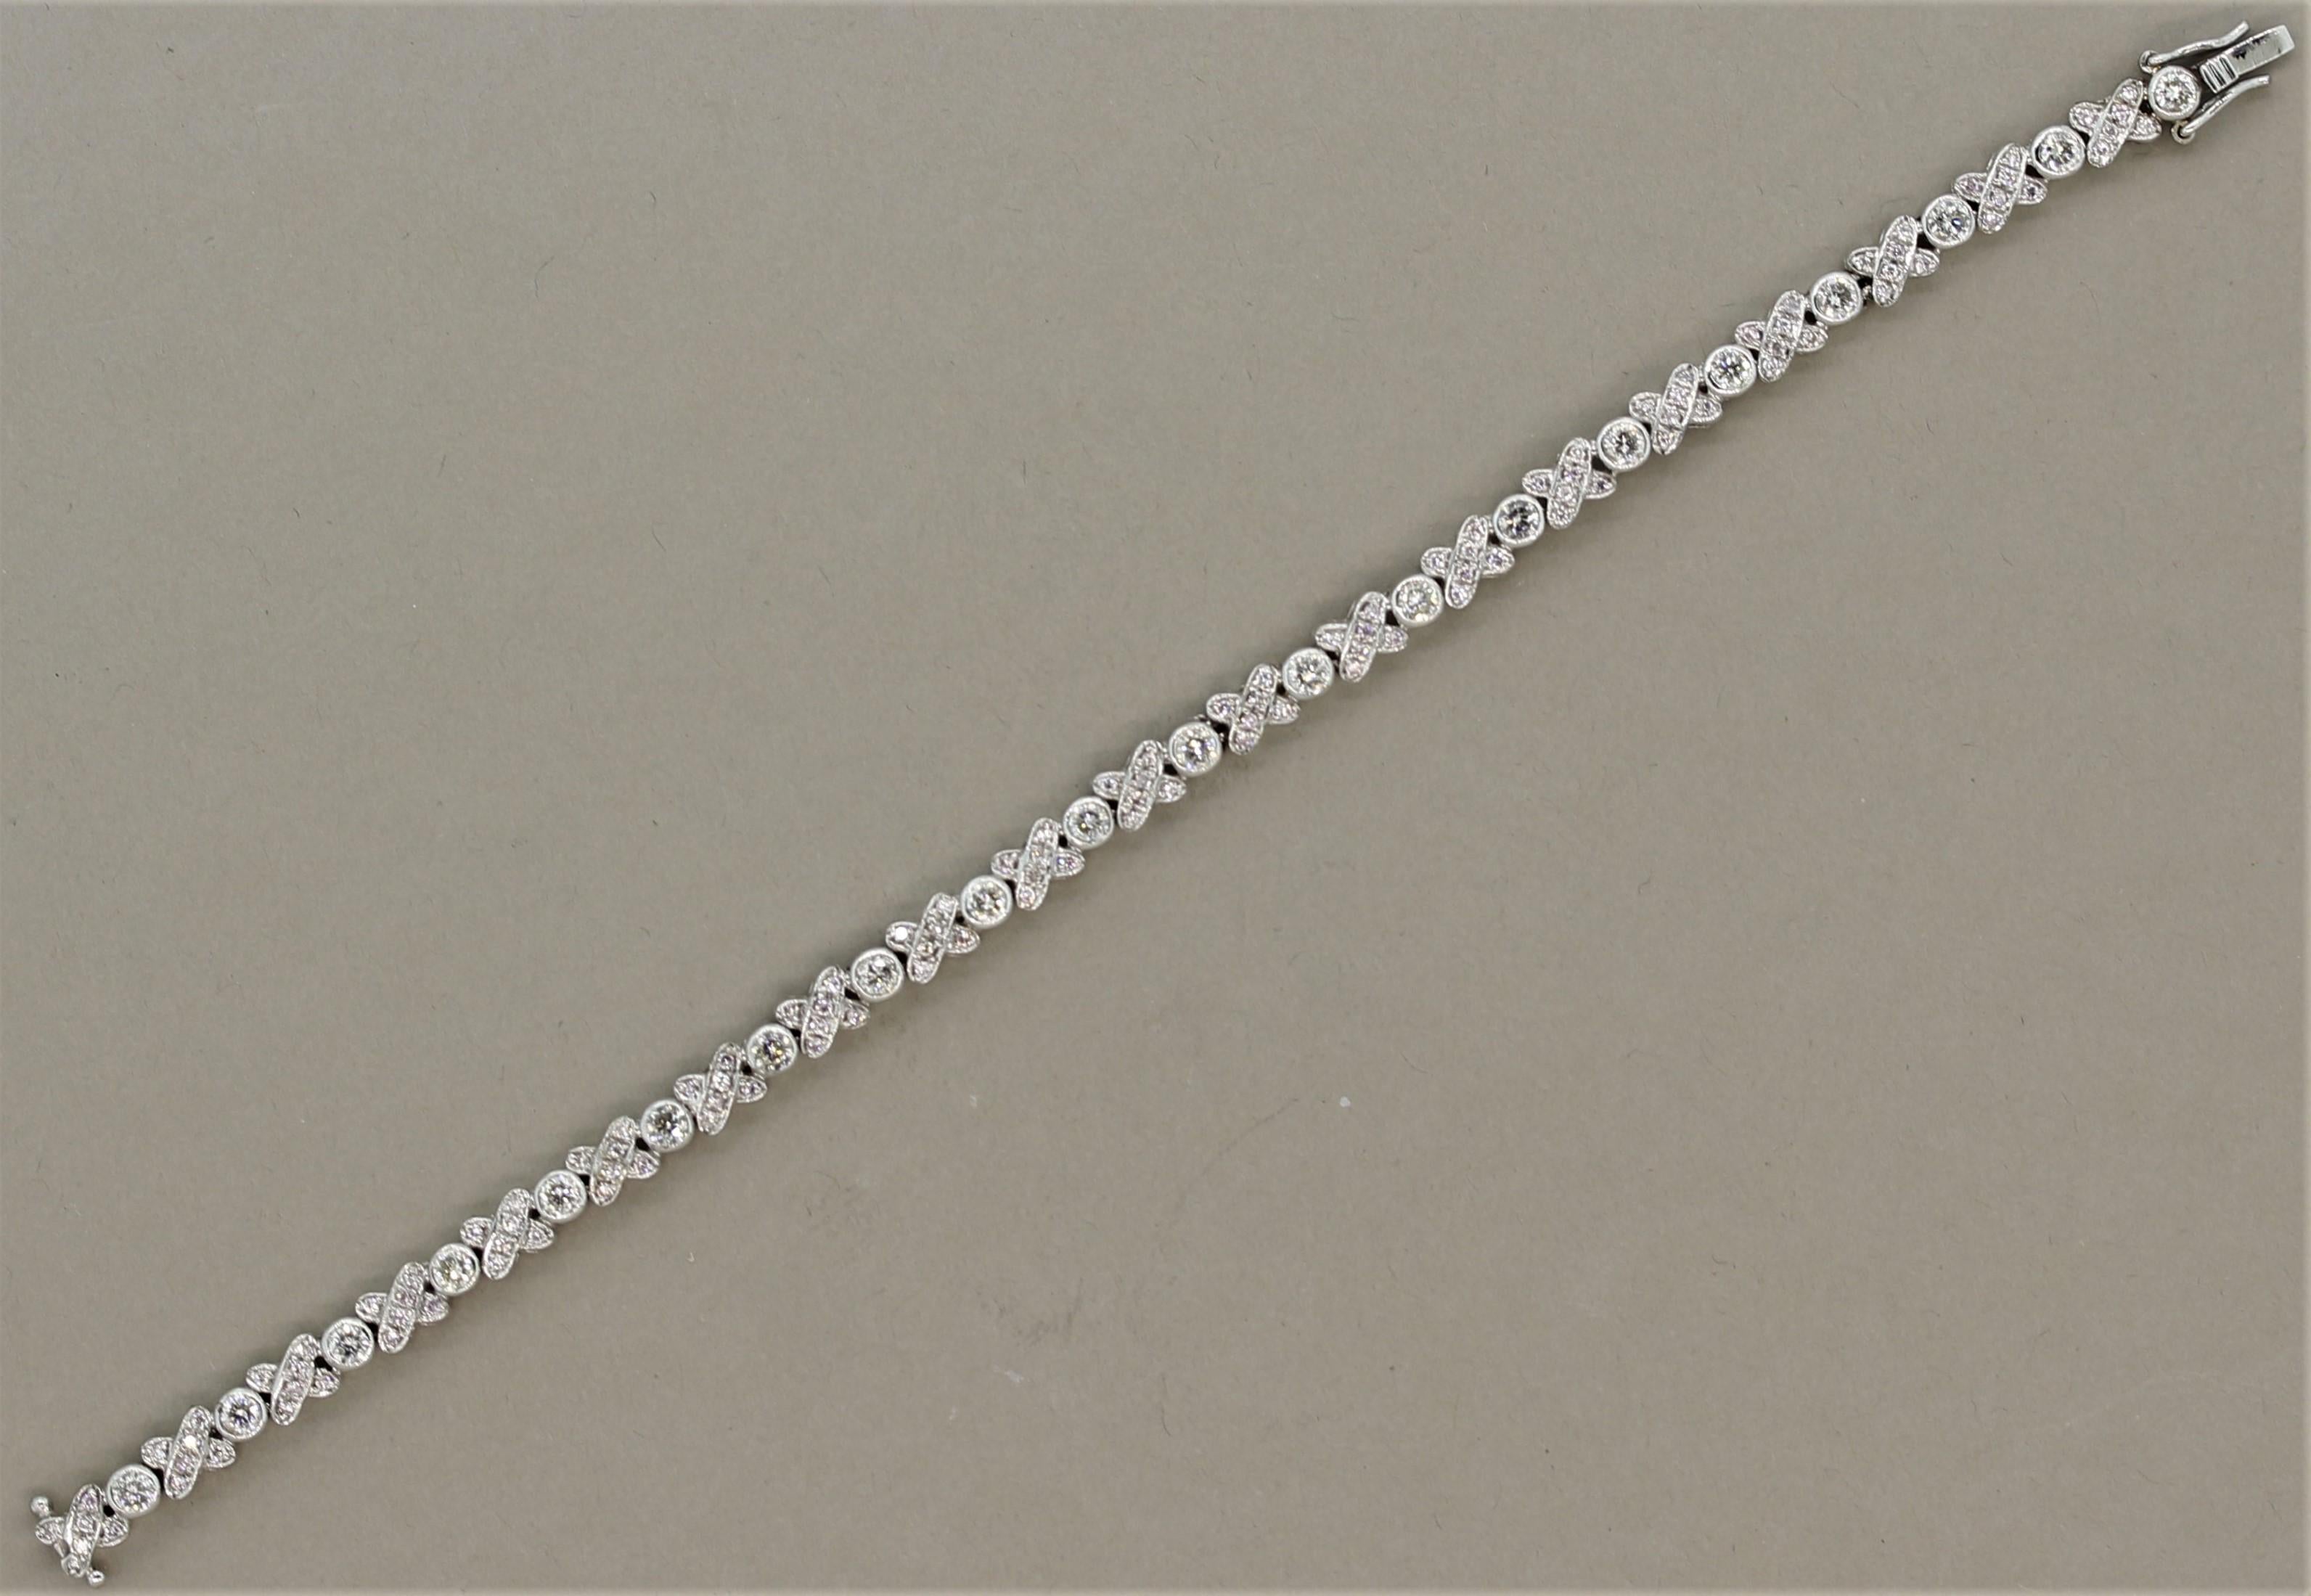 A sweet diamond bracelet in a stylish “XO” design. It features 4.20 carats of round brilliant cut diamonds set across the bracelet creating X and O lettering. The X are set with smaller diamonds while the O is a larger single stone. Made in 14k